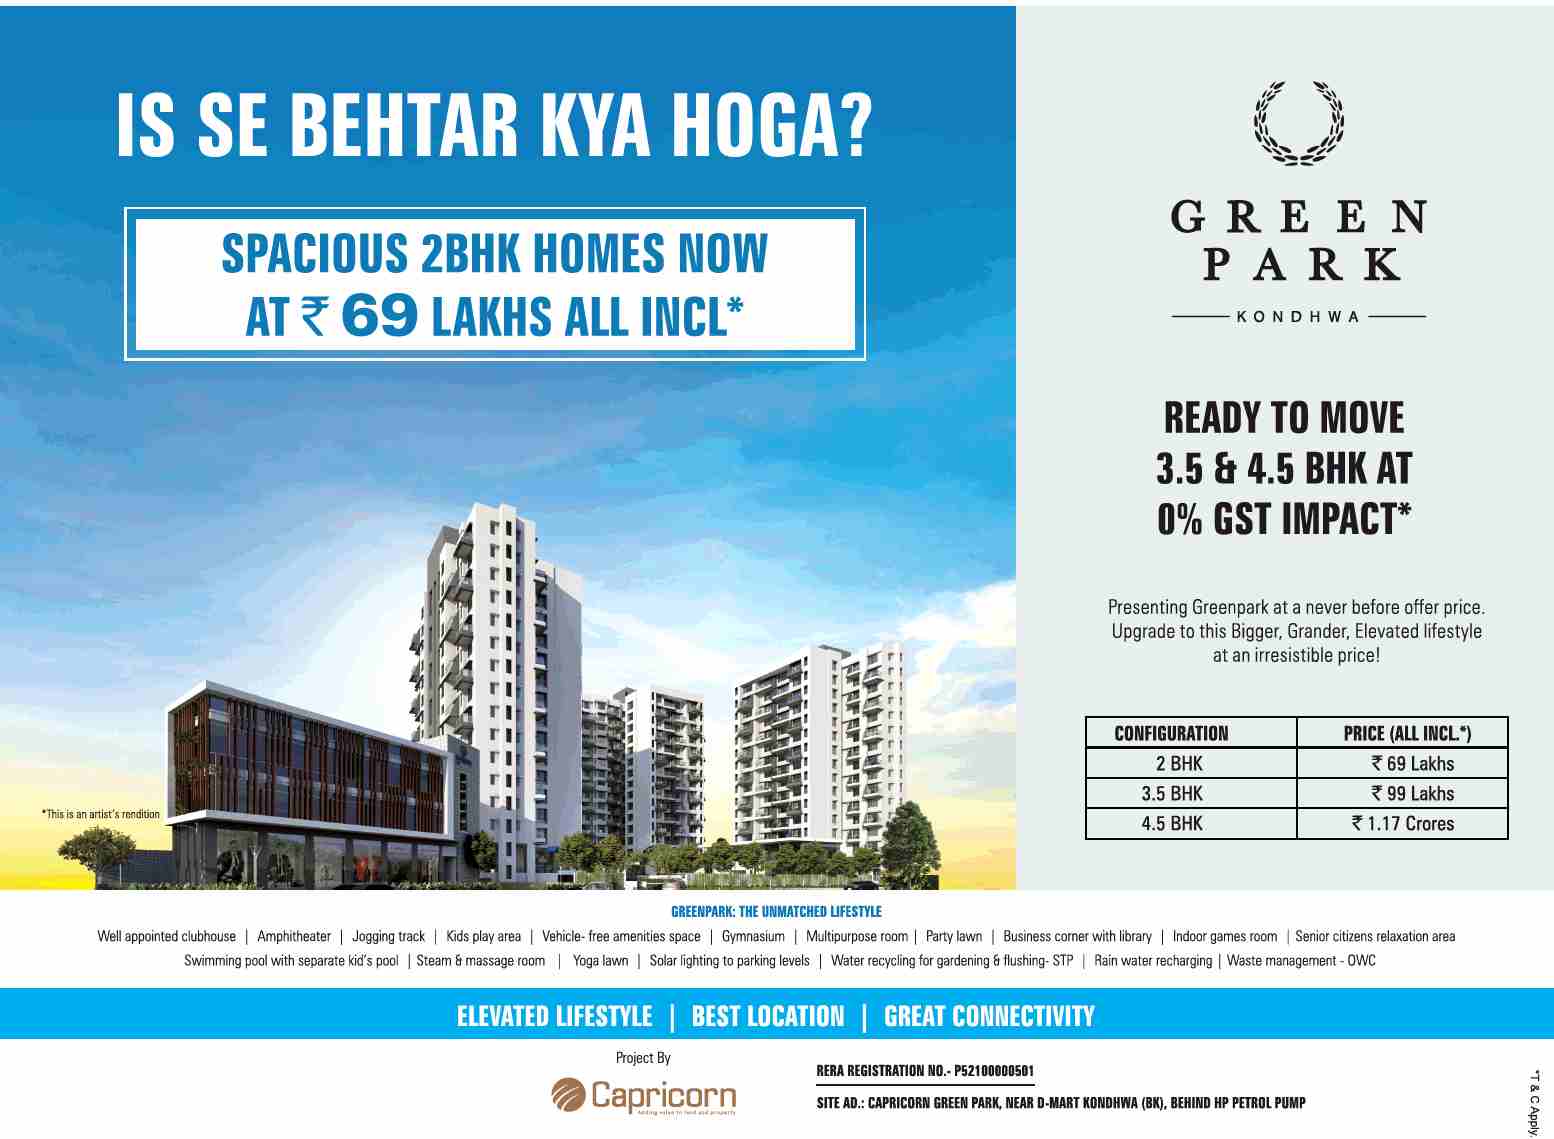 Book ready to move 3.5 & 4.5 BHK with 0% GST impact at Capricorn Green Park in Pune